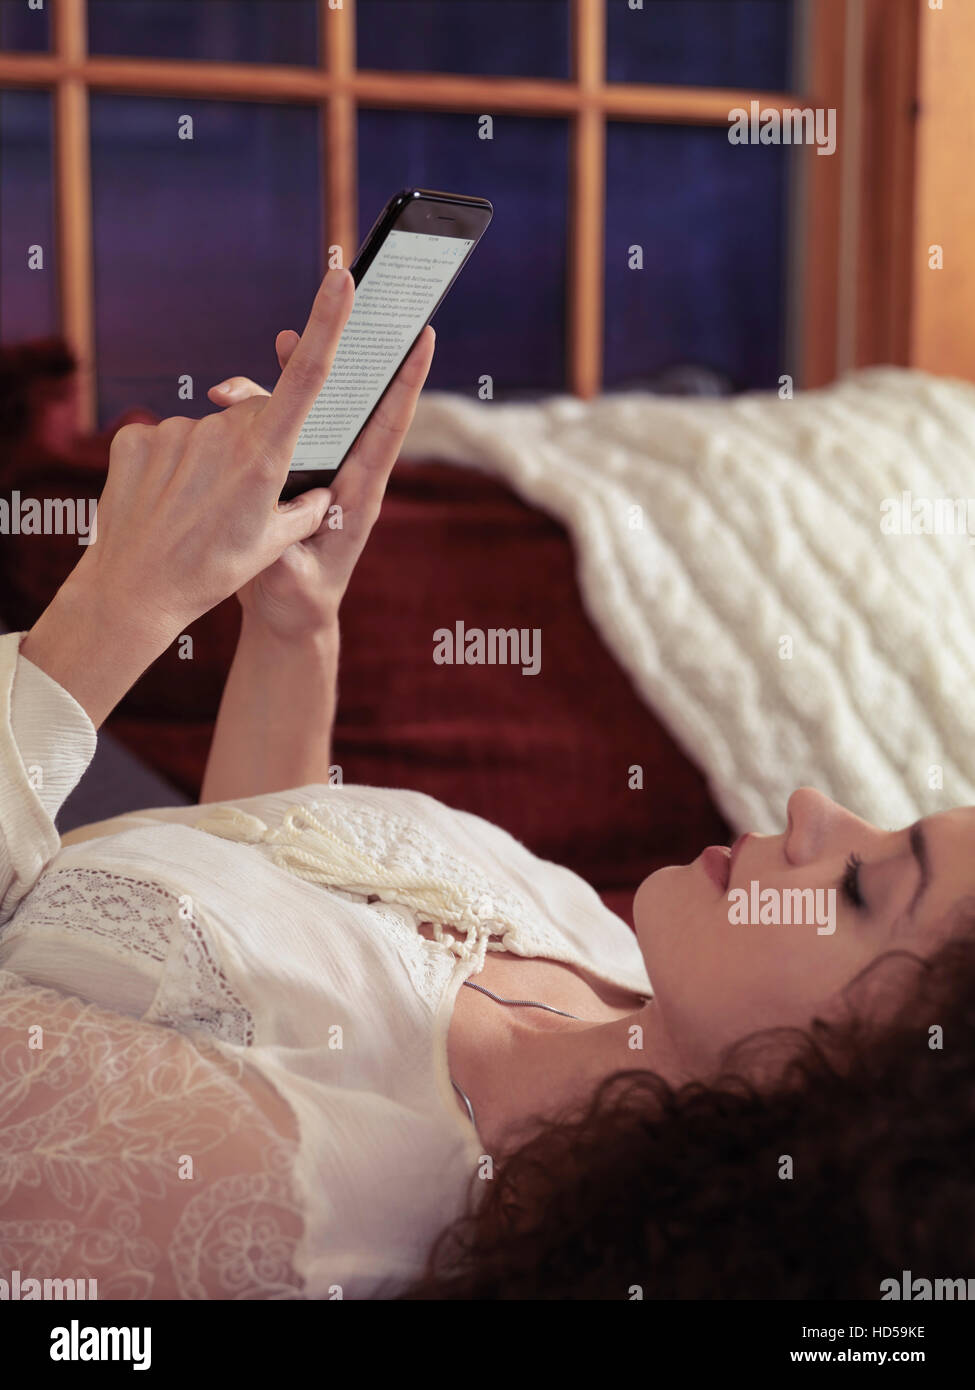 Woman reading book on iPhone 7 Plus at home lying on a sofa Stock Photo